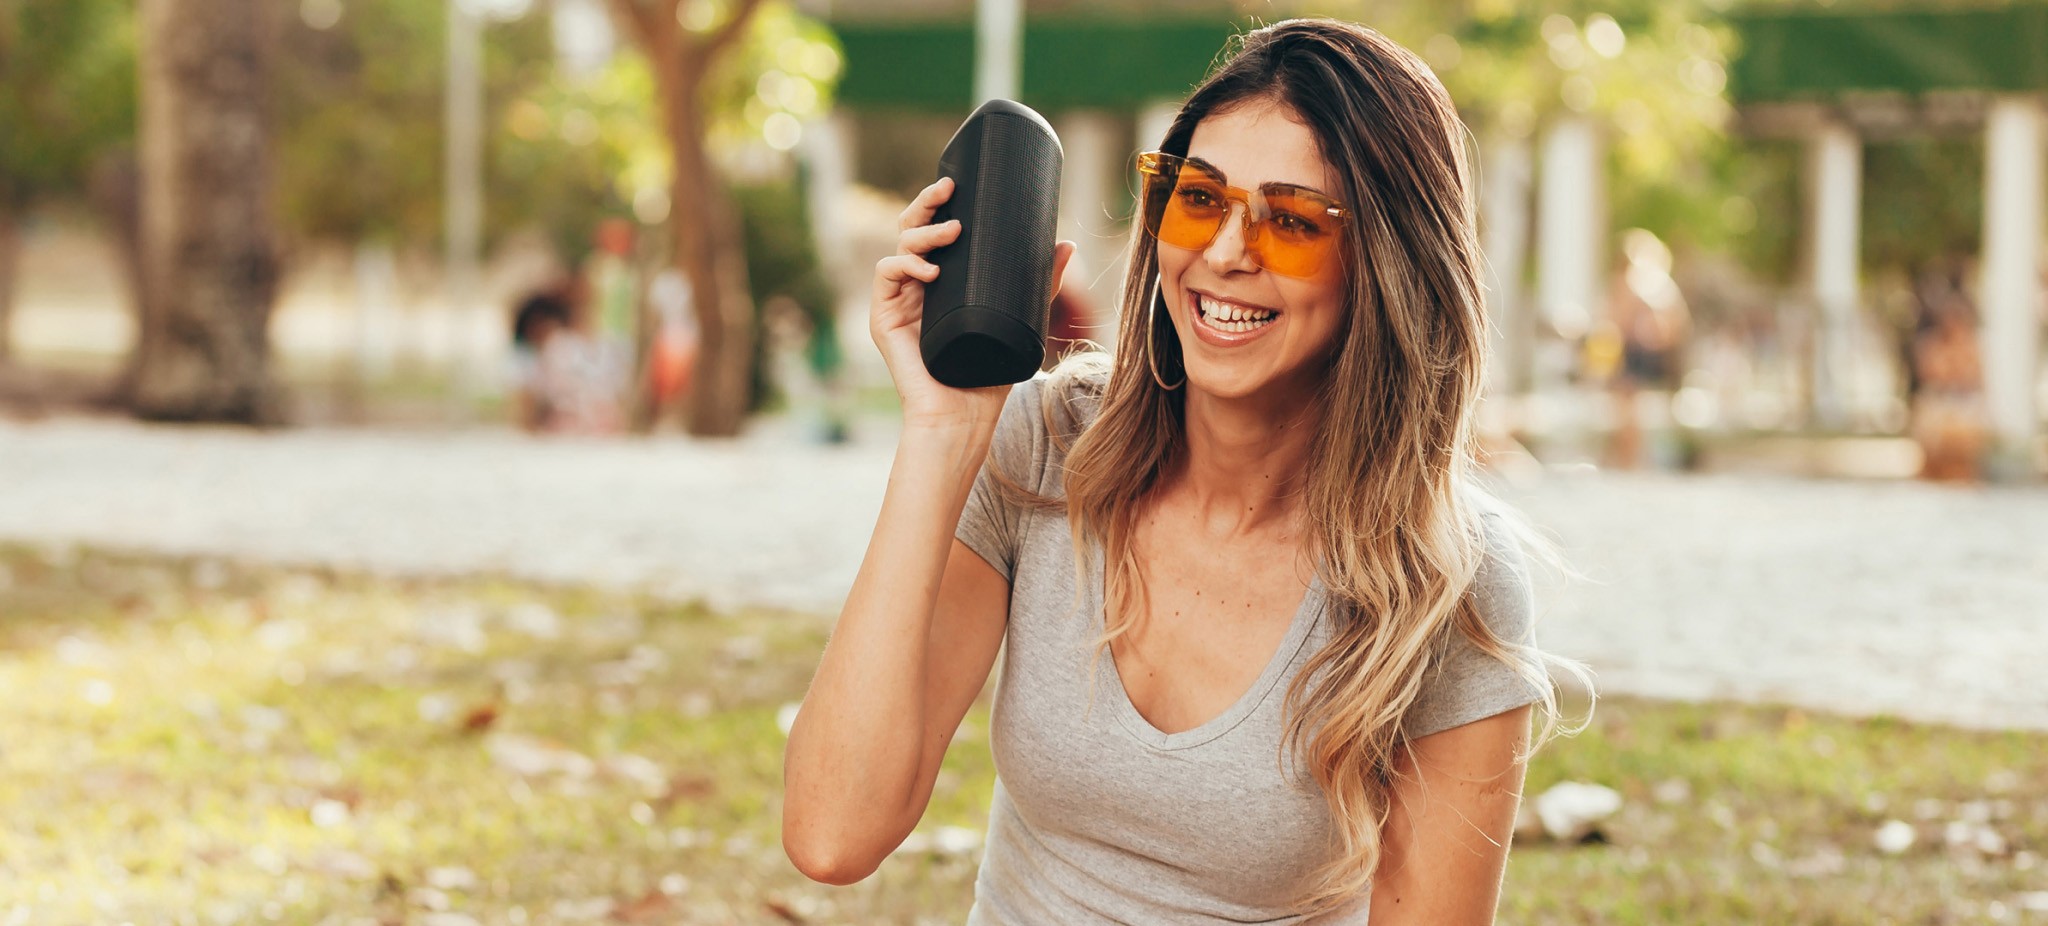 woman holding a bluetooth speaker at park